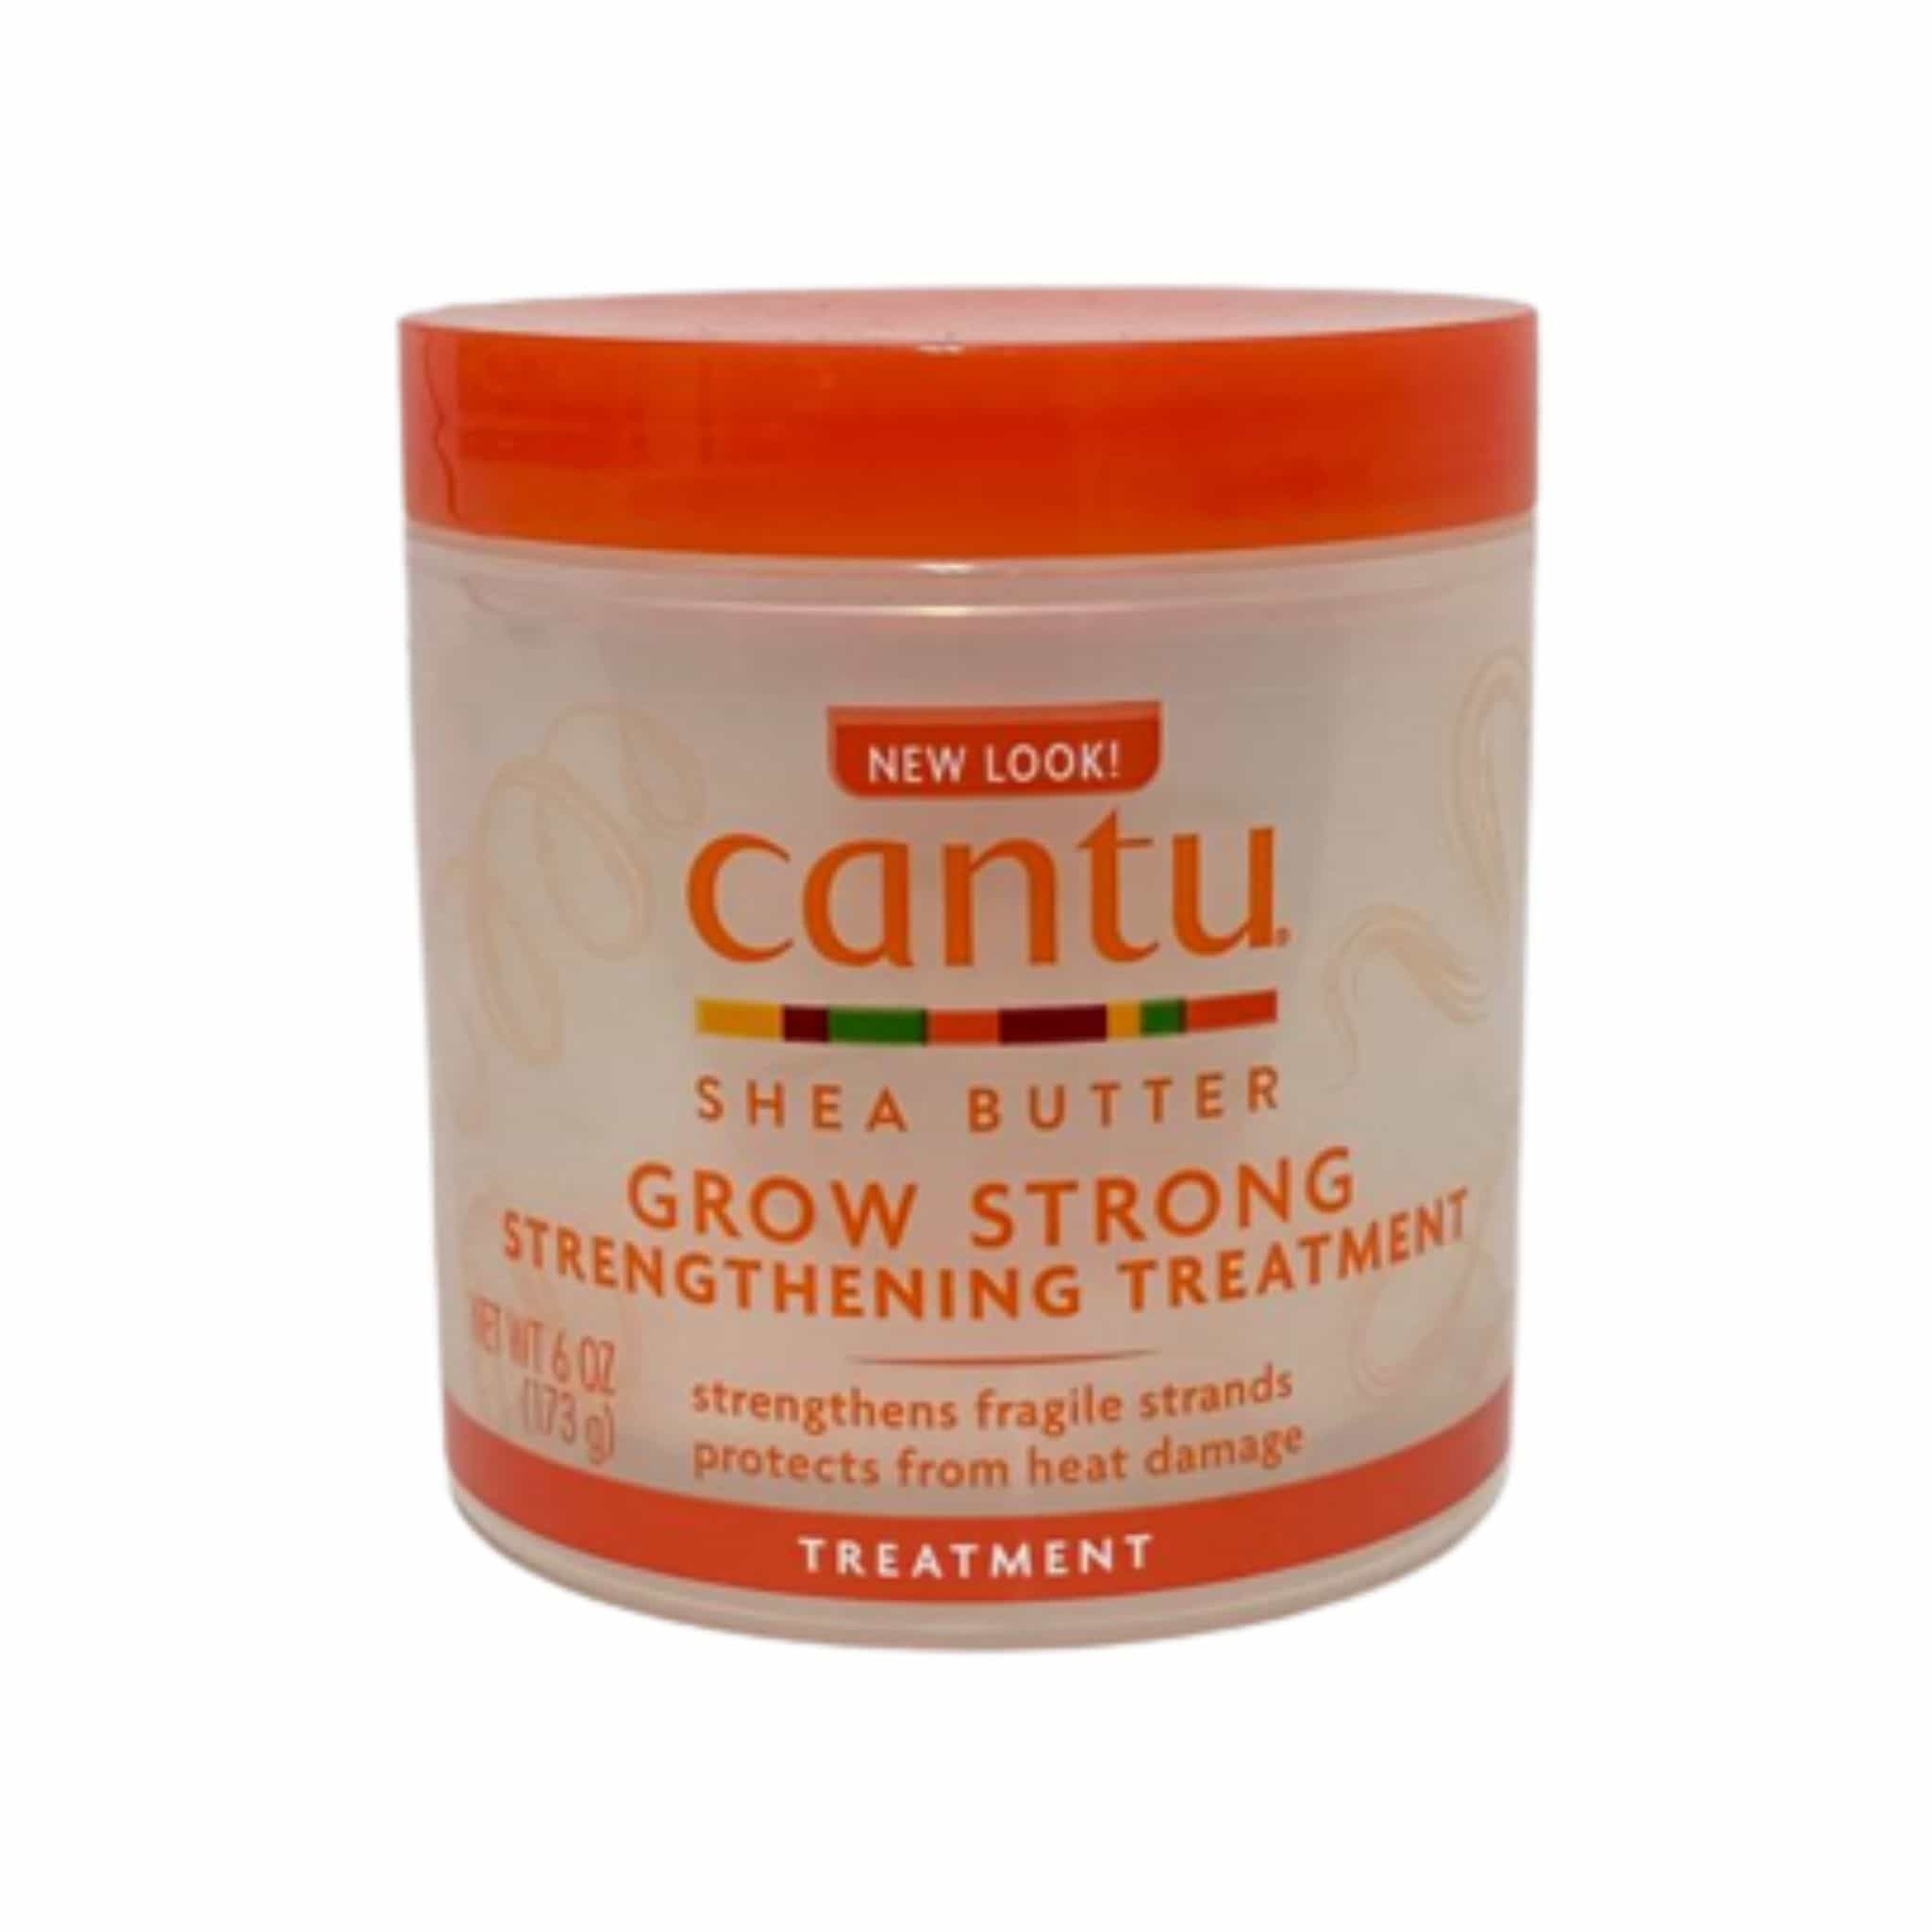 GROW STRONG STRENGTHENING TREATMENT CANT 6fl.oz